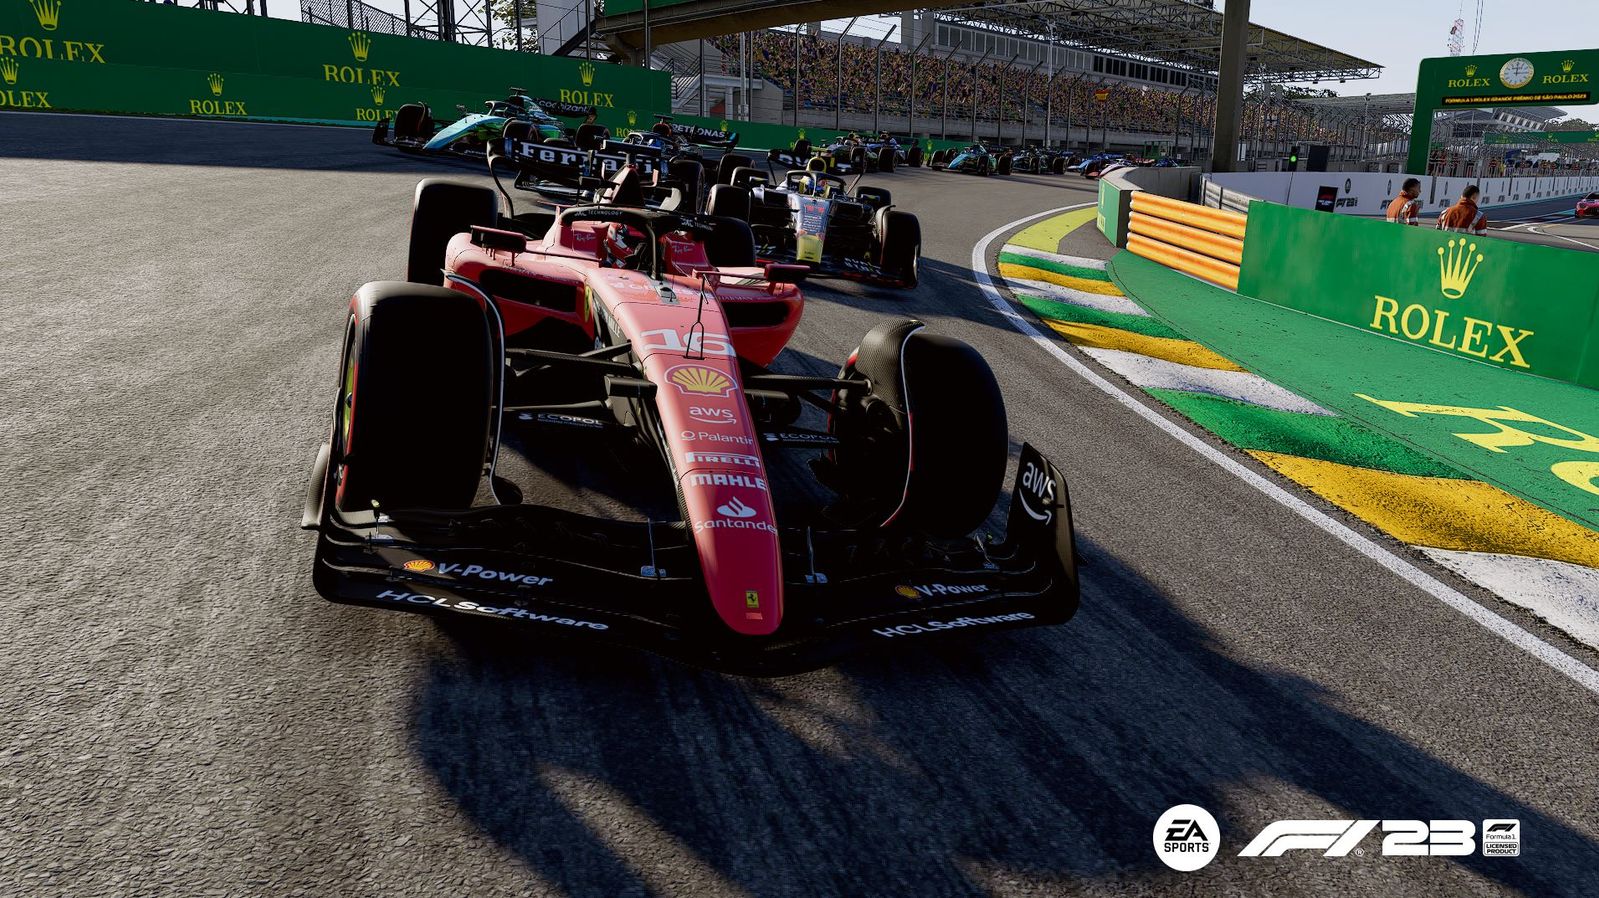 F1 23 update 1.08 patch notes